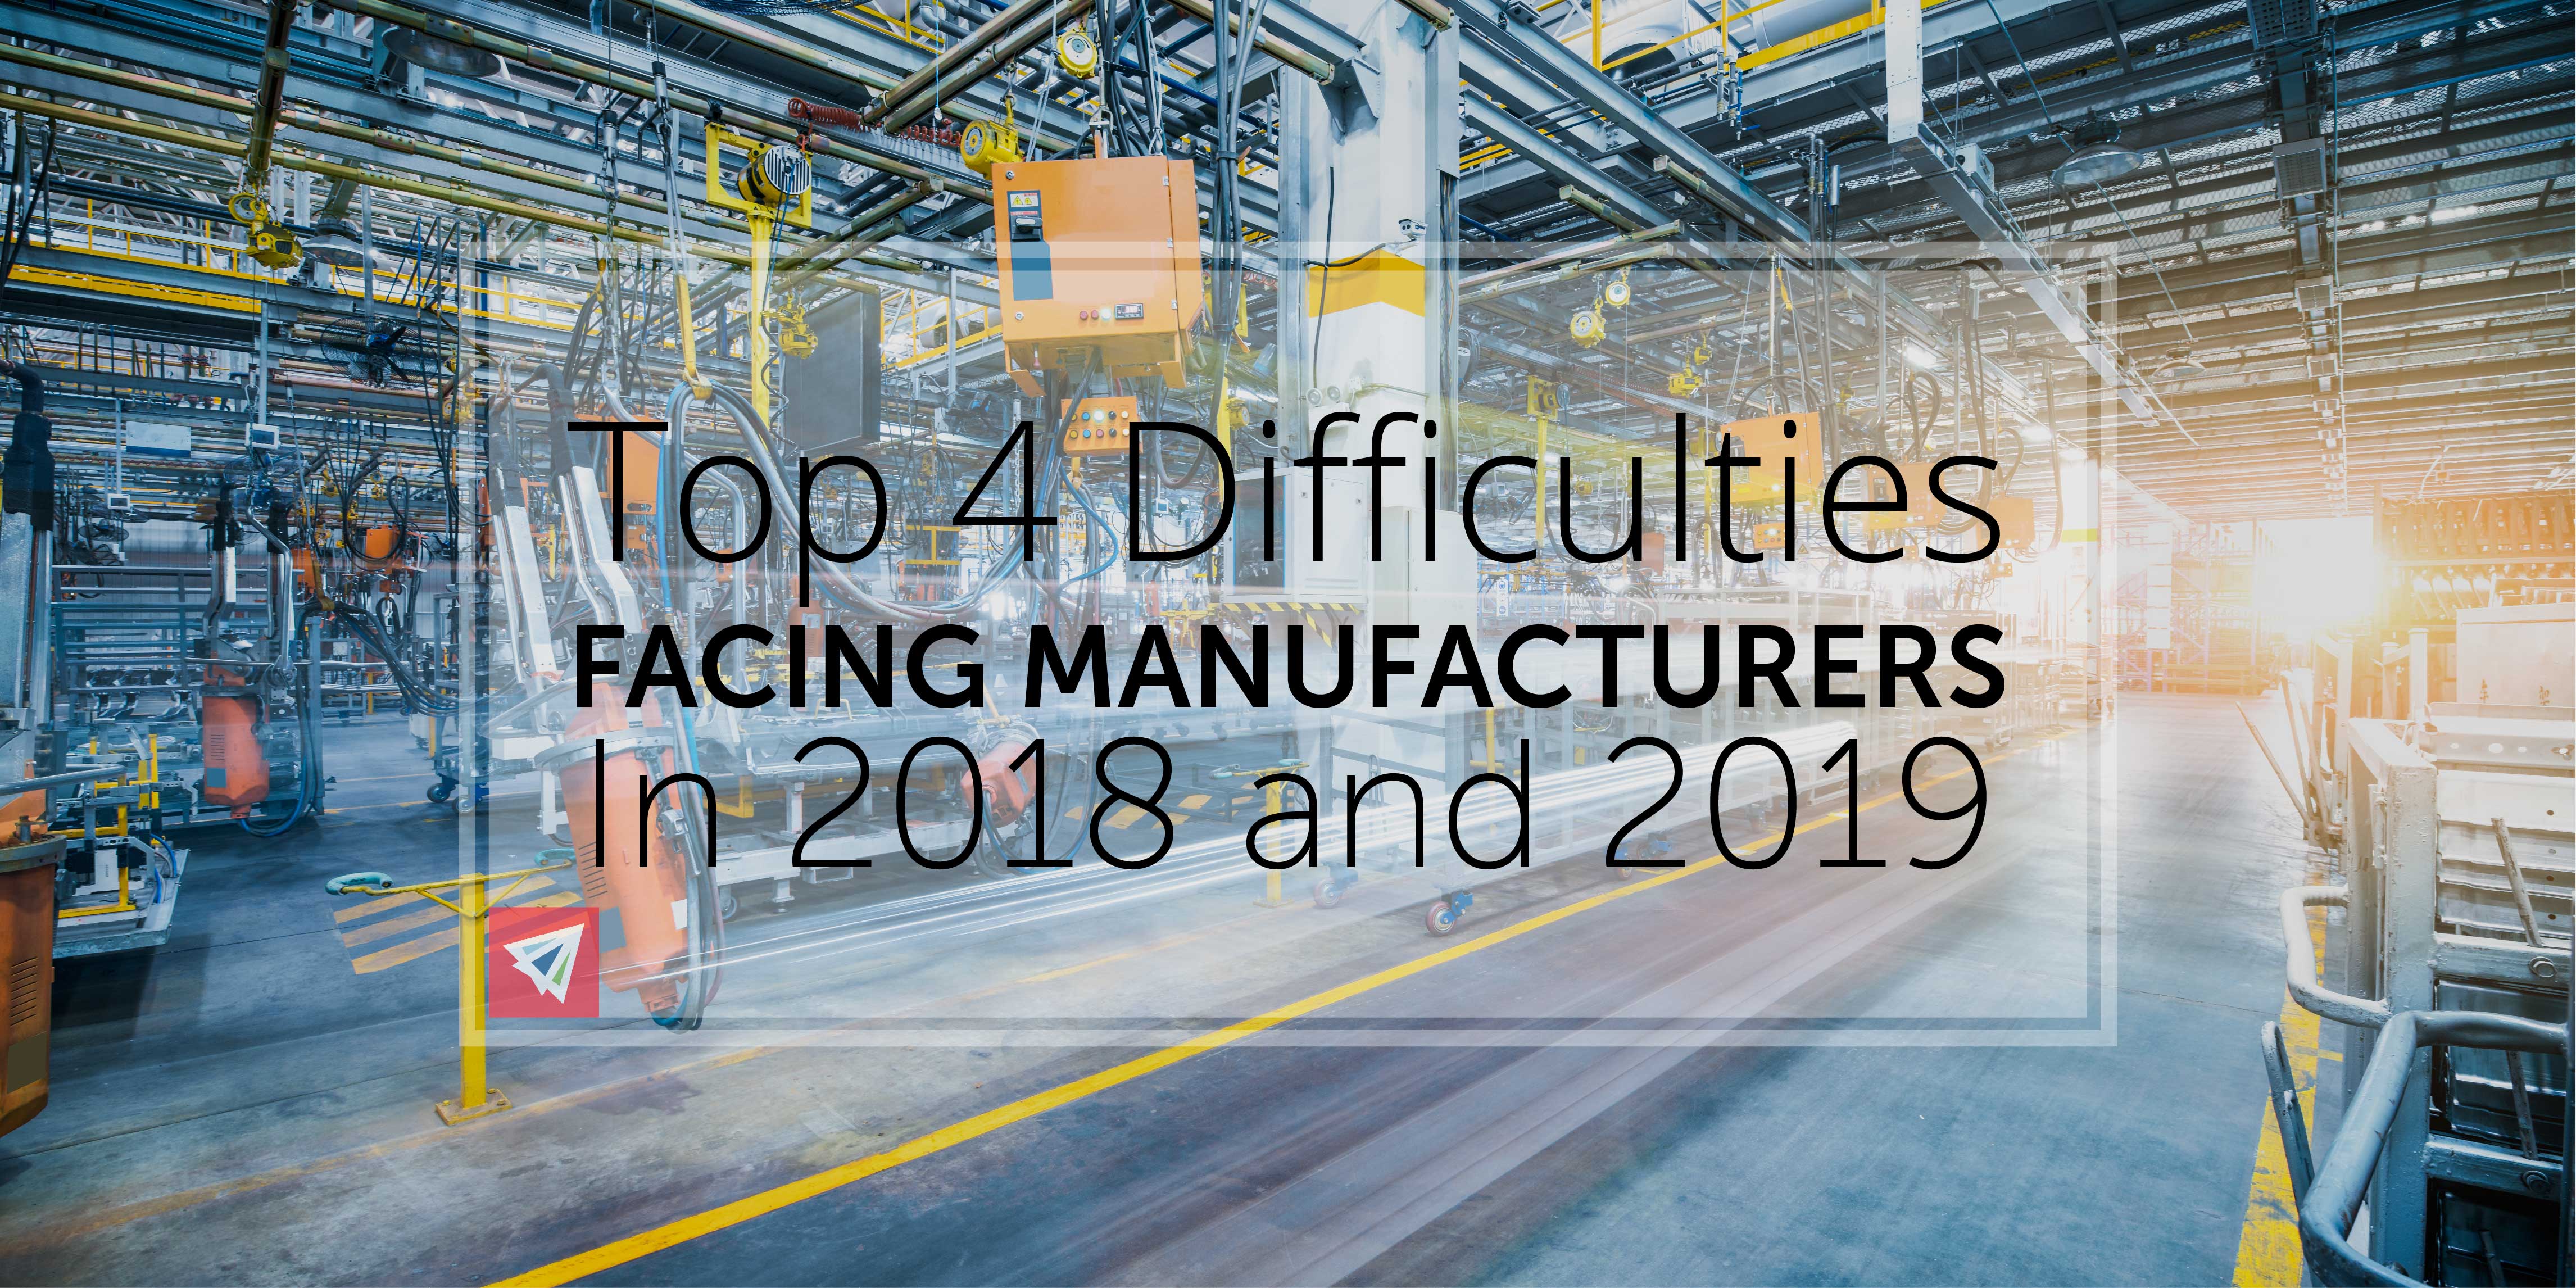 Top 4 Difficulties Facing Manufacturers in 2018 & 2019